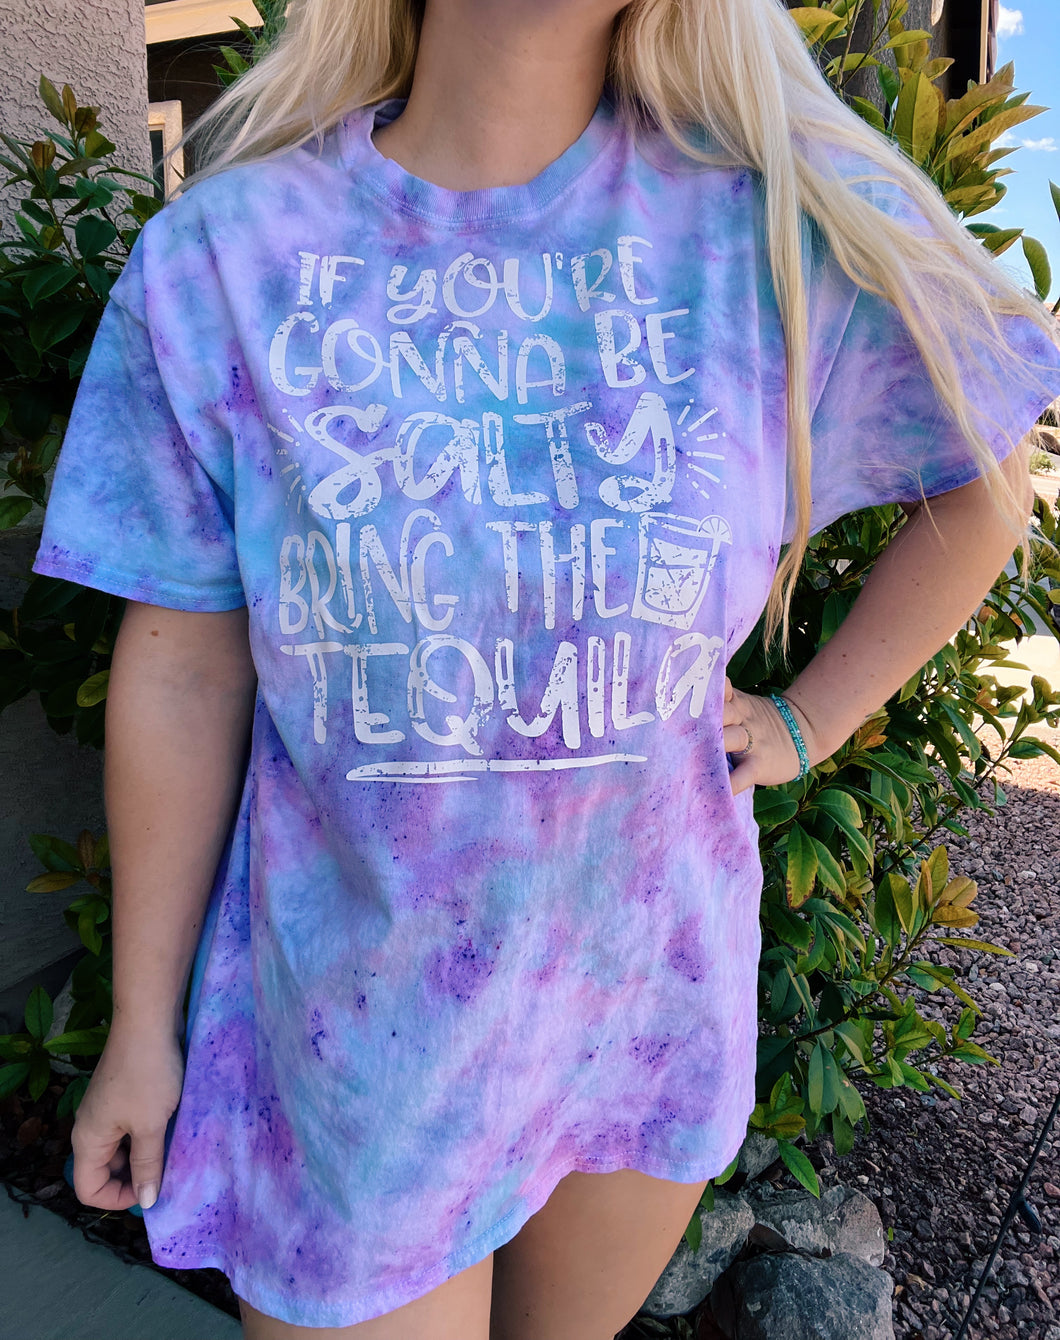 If you’re going to be salty, bring the tequila t-shirt